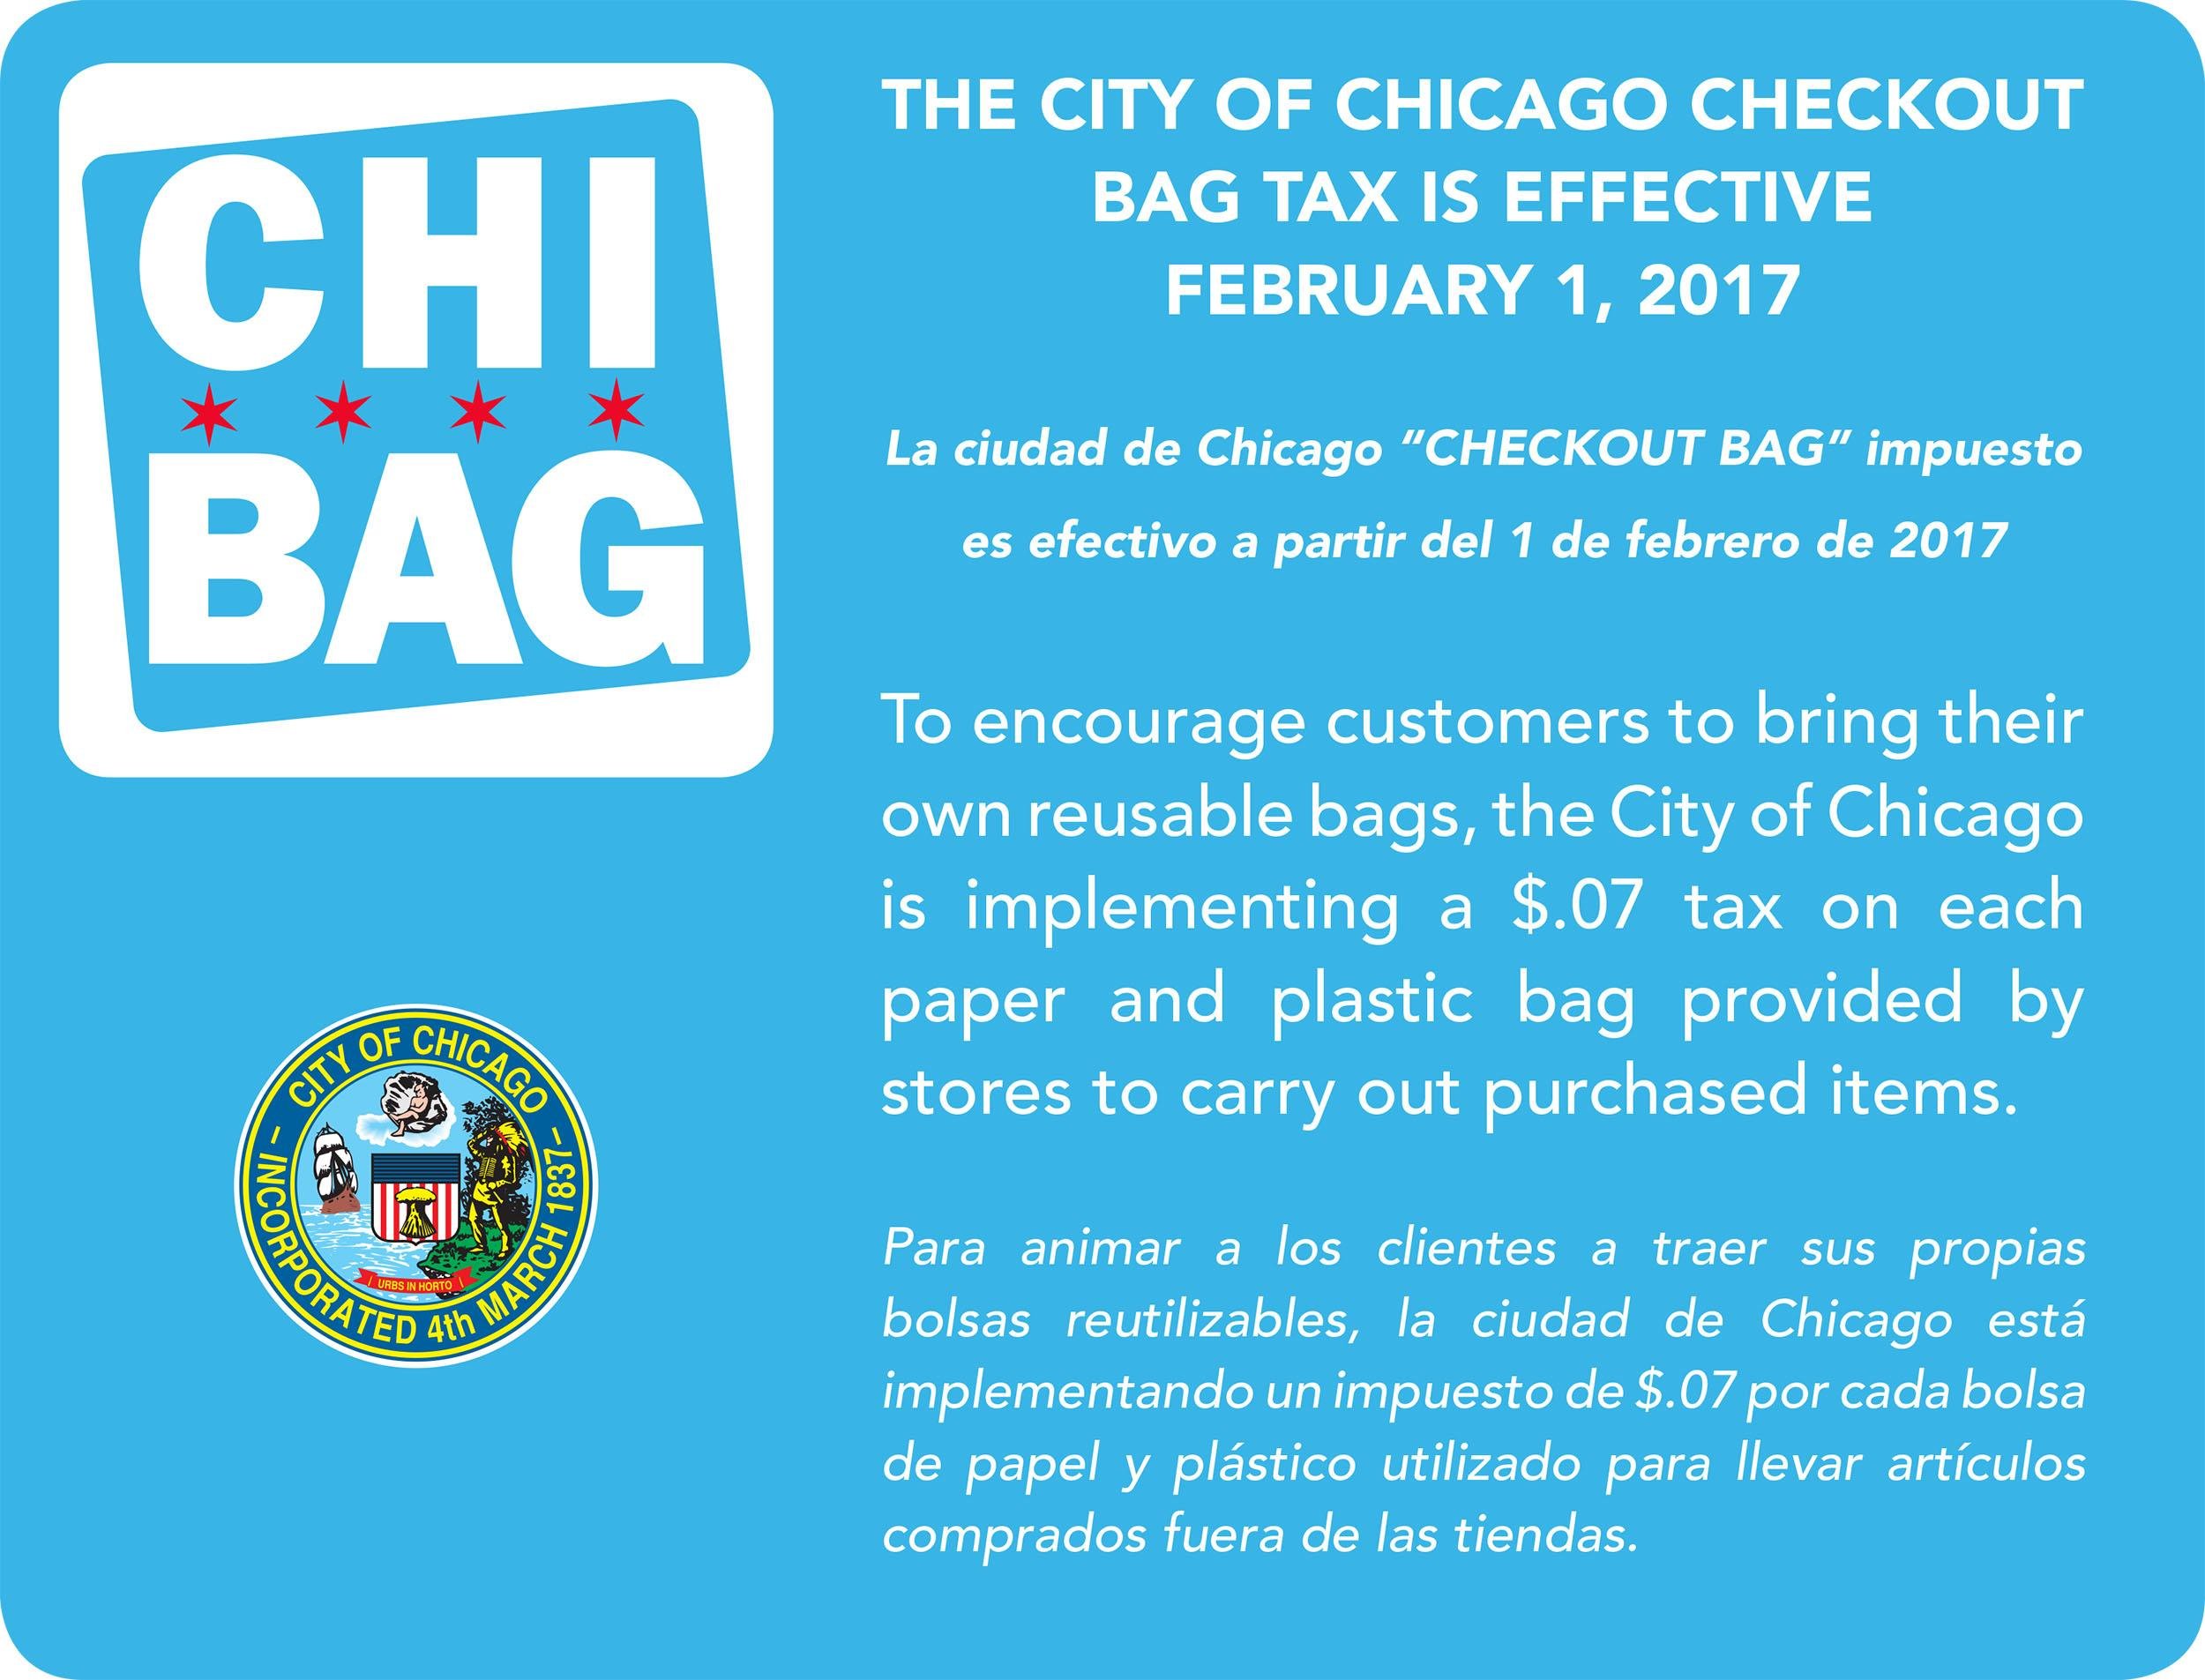 Click to enlarge image of city placard detailing checkout bag tax.